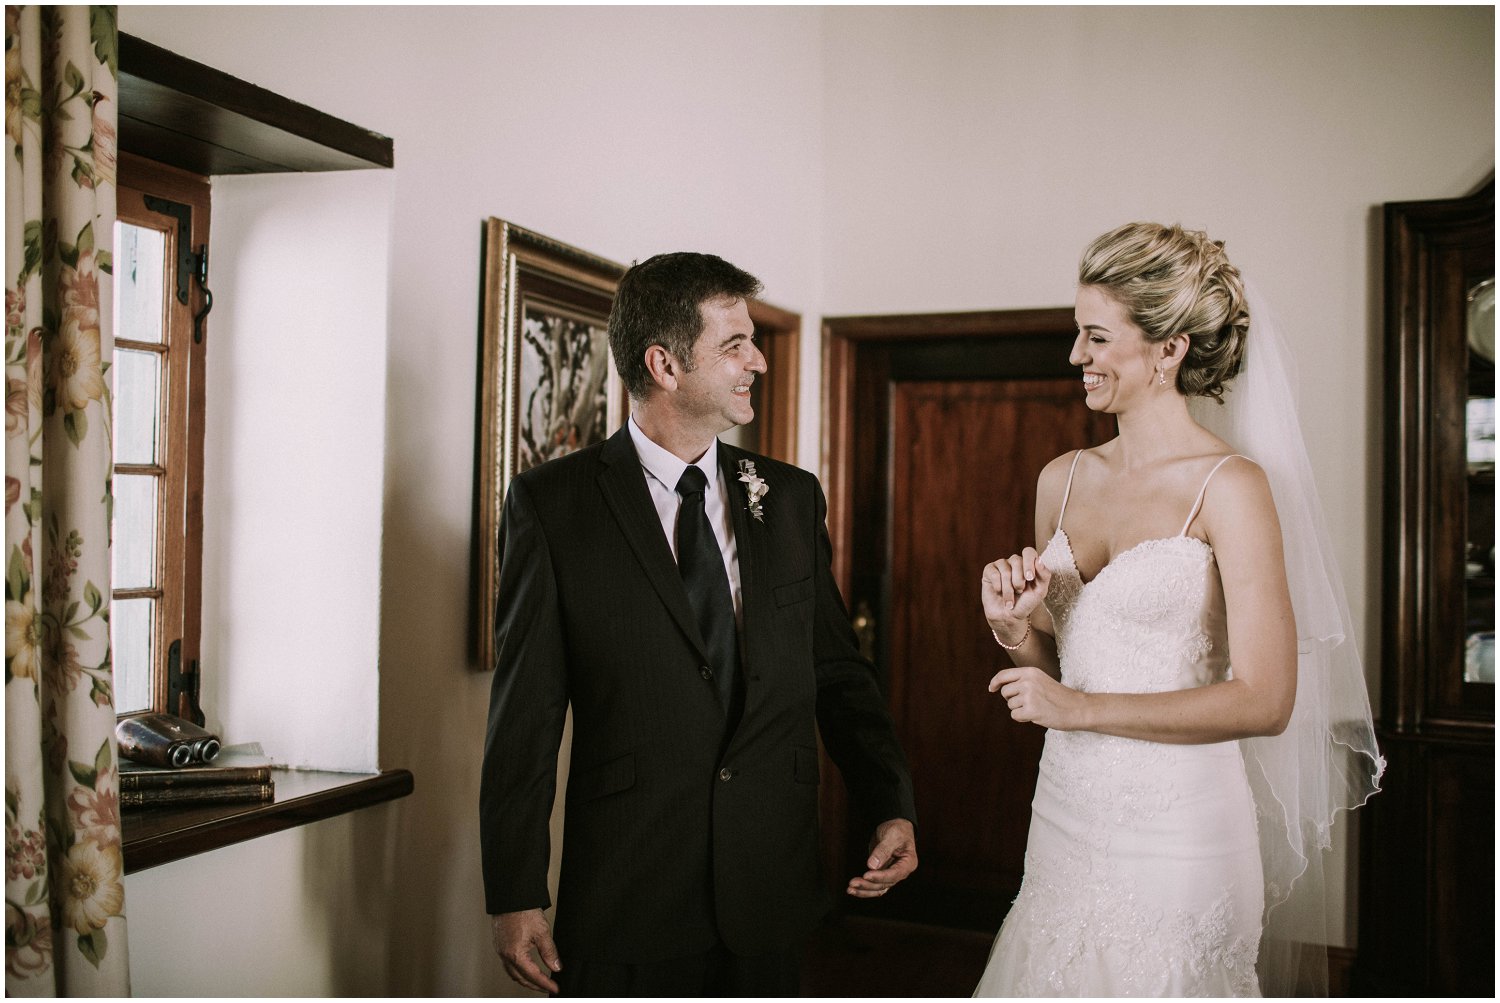 Top Artistic Documentary Wedding Photographer Cape Town South Africa Rue Kruger_0080.jpg